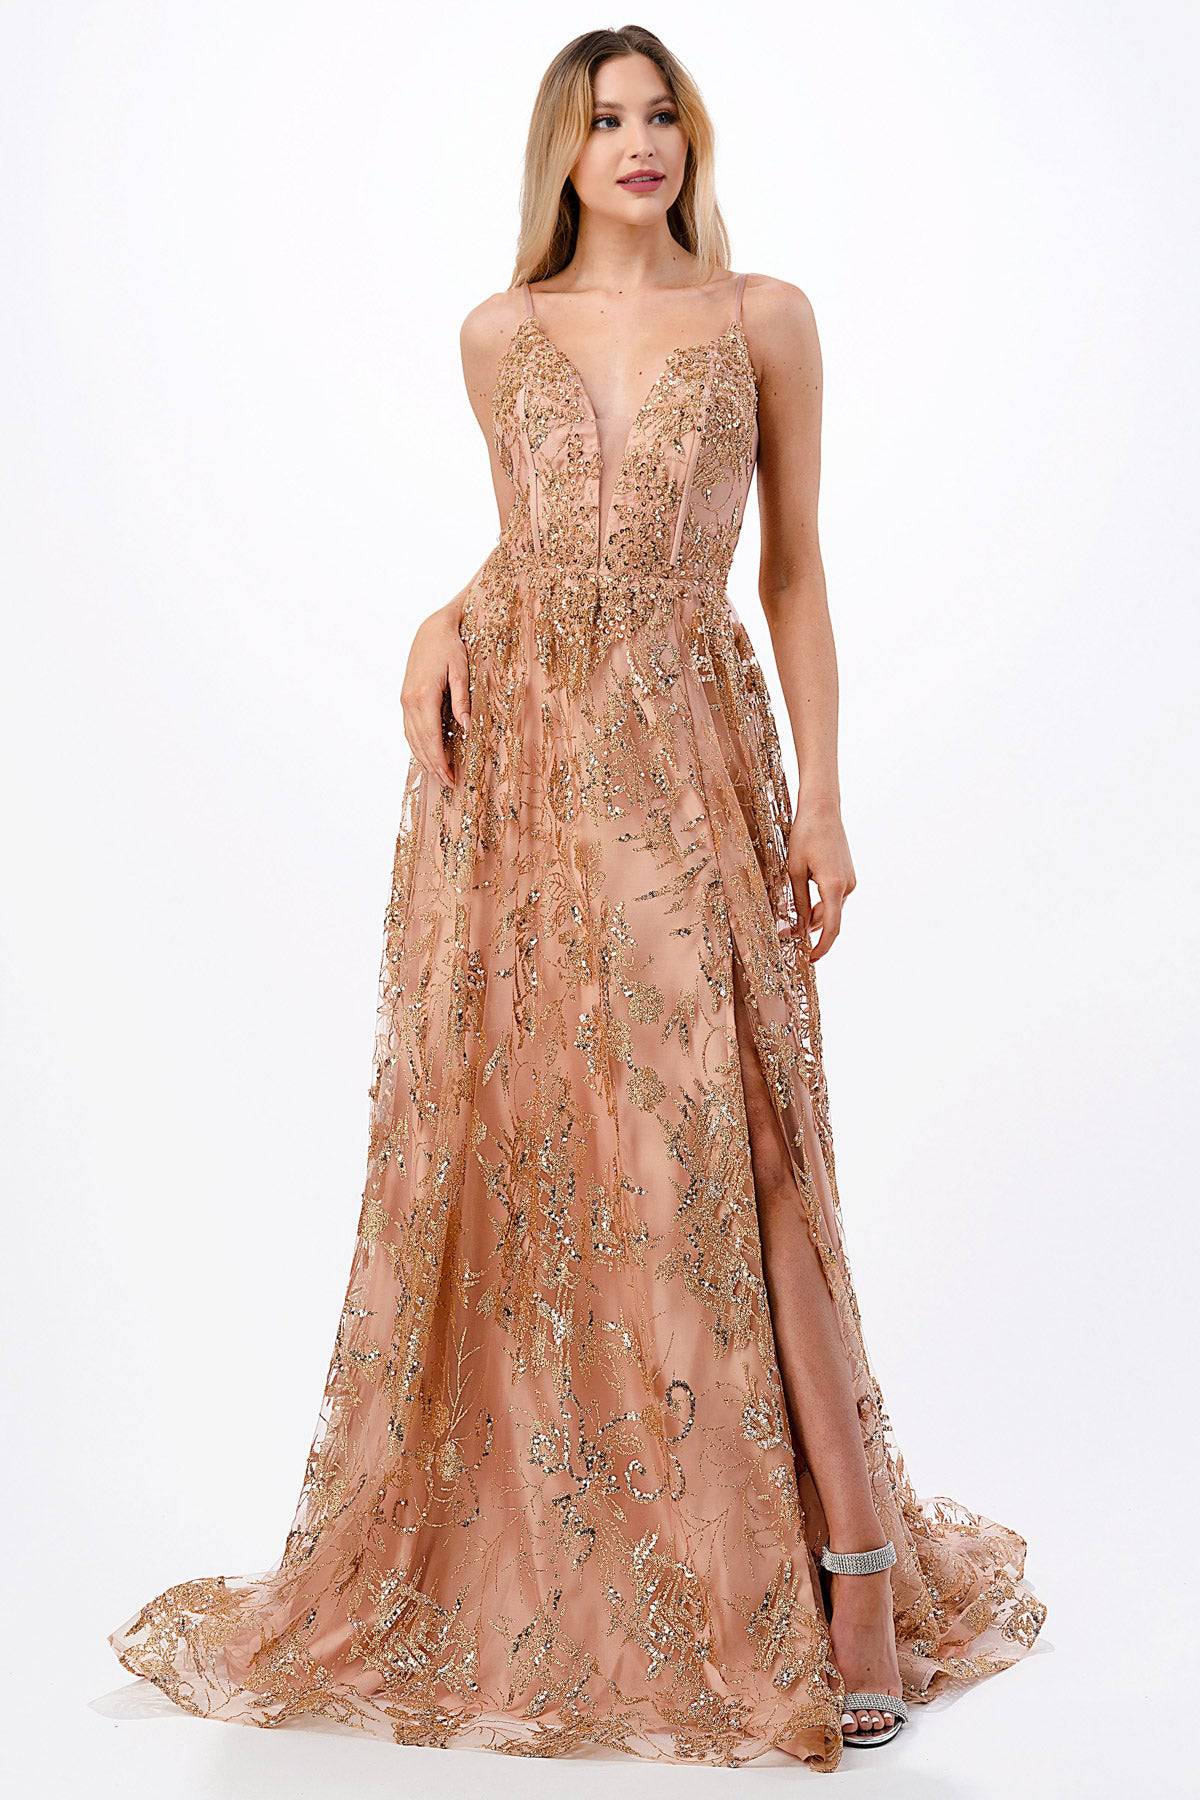 Aspeed Design L2664 Sparkling Rose Gold Sequin Gown - NORMA REED